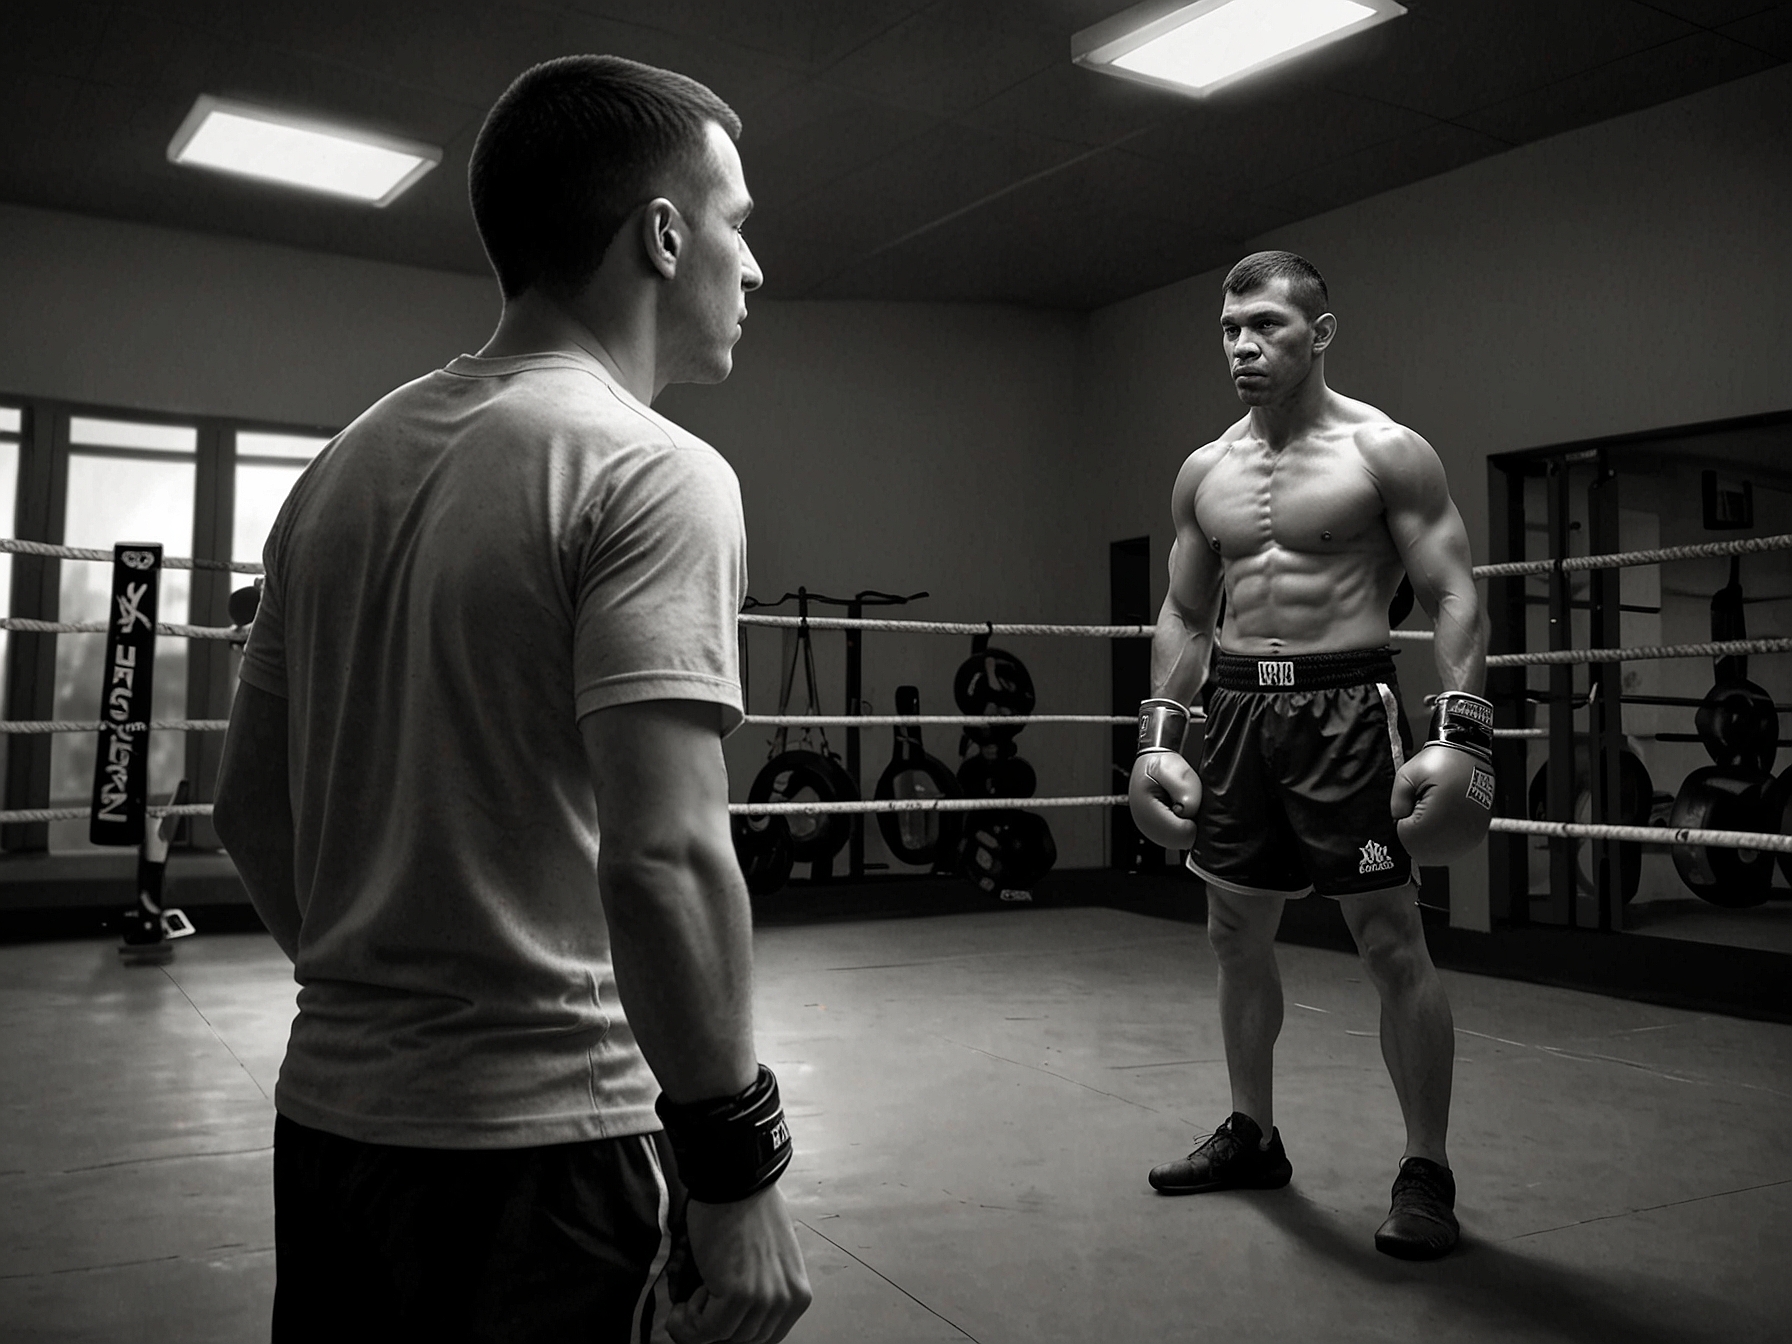 Legendary coach Javier Mendez observing a training session at the American Kickboxing Academy, spotlighting the mentor Magomedov aims to train under to elevate his UFC career.